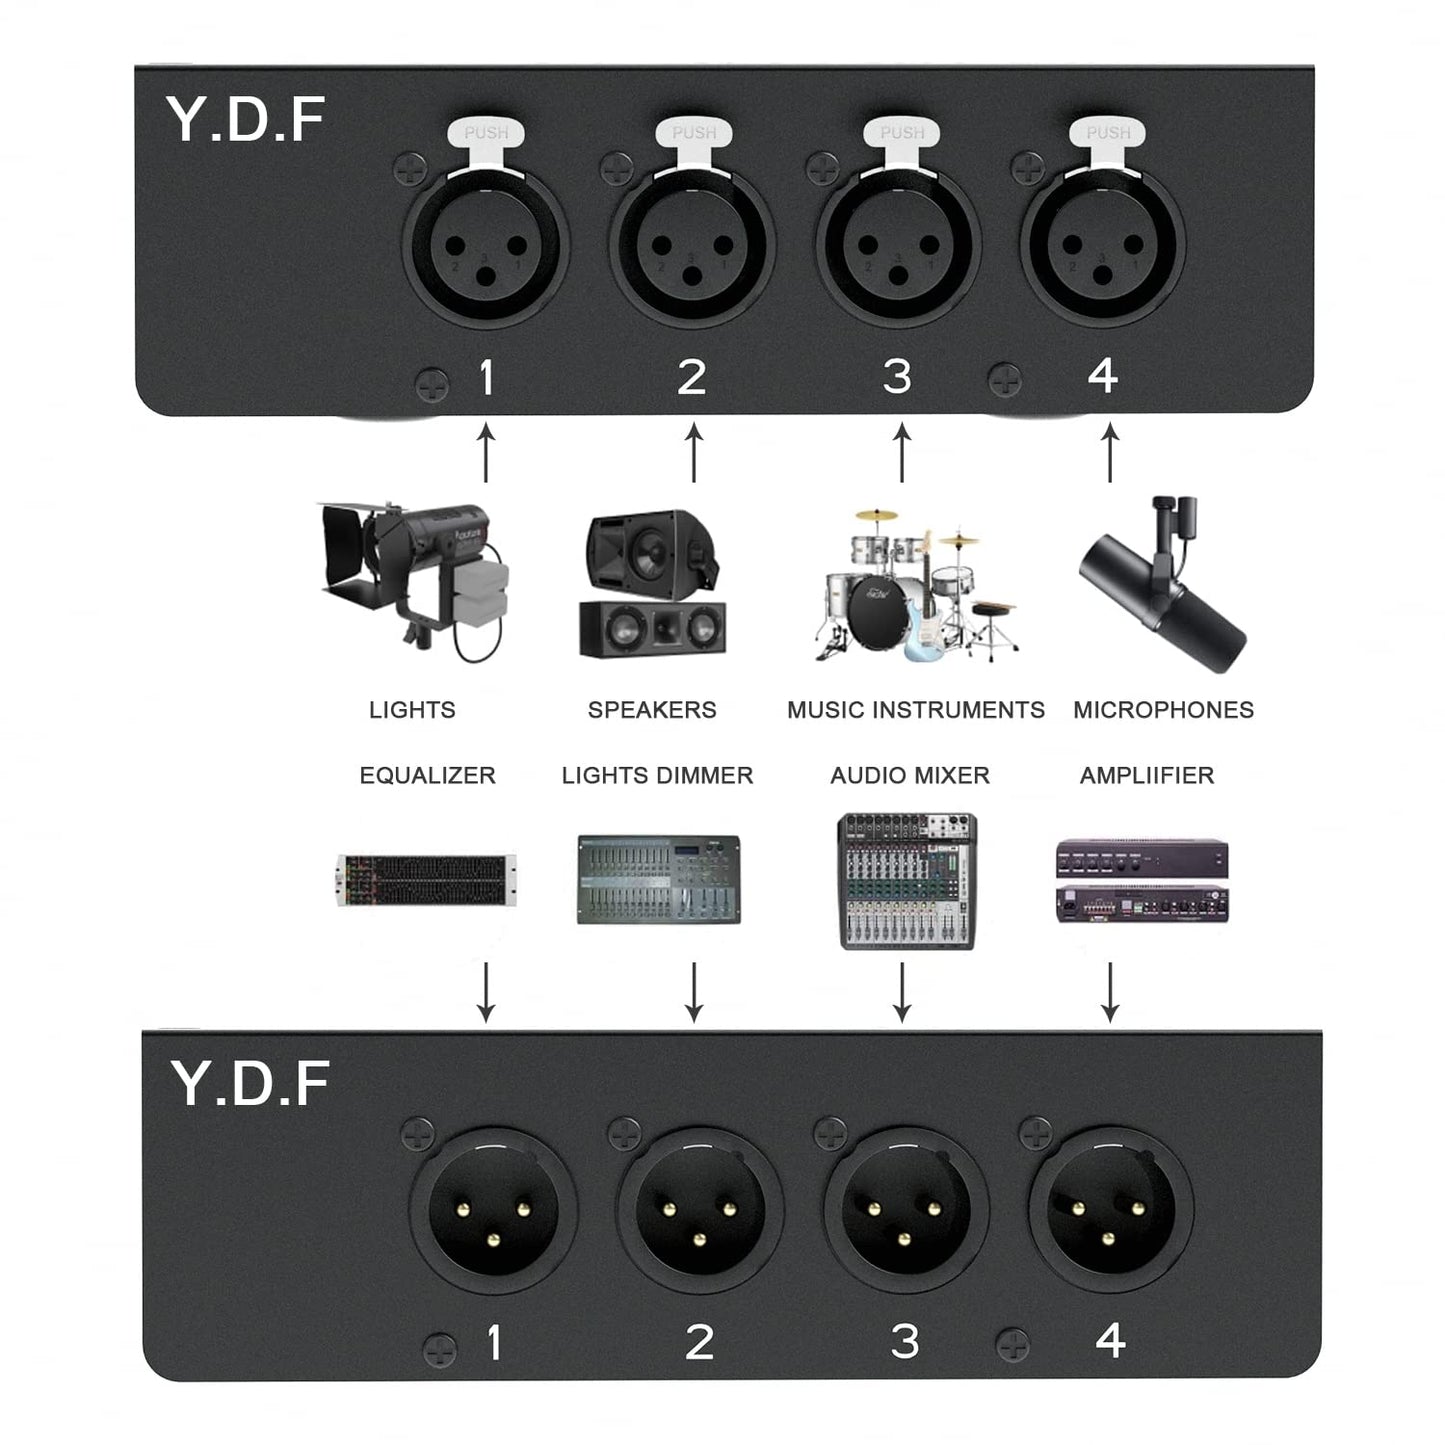 4 Channel Sub Snake Box over Ethercon Cable Multi Extender for Stage Lighting and Recording Studio- XLR/AES/DMX Channel Over Shielded Cat5/Cat5E/Cat6/Cat7 Ethernet Cable XLR Cable (1 Male+1 Fe